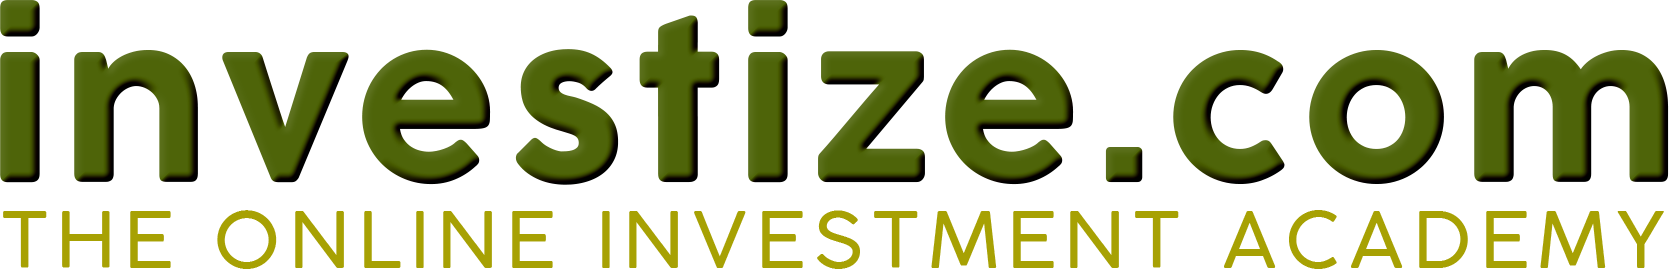 Investize.com - The Online Investment Academy